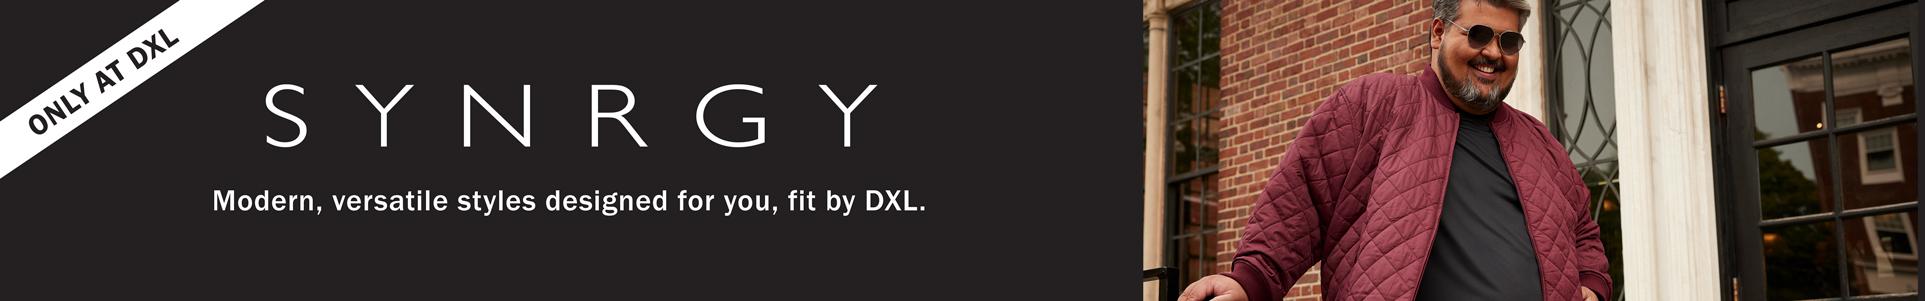 SYNRGY | Modern, versatile styles designed for you, fit by DXL. | ONLY AT DXL